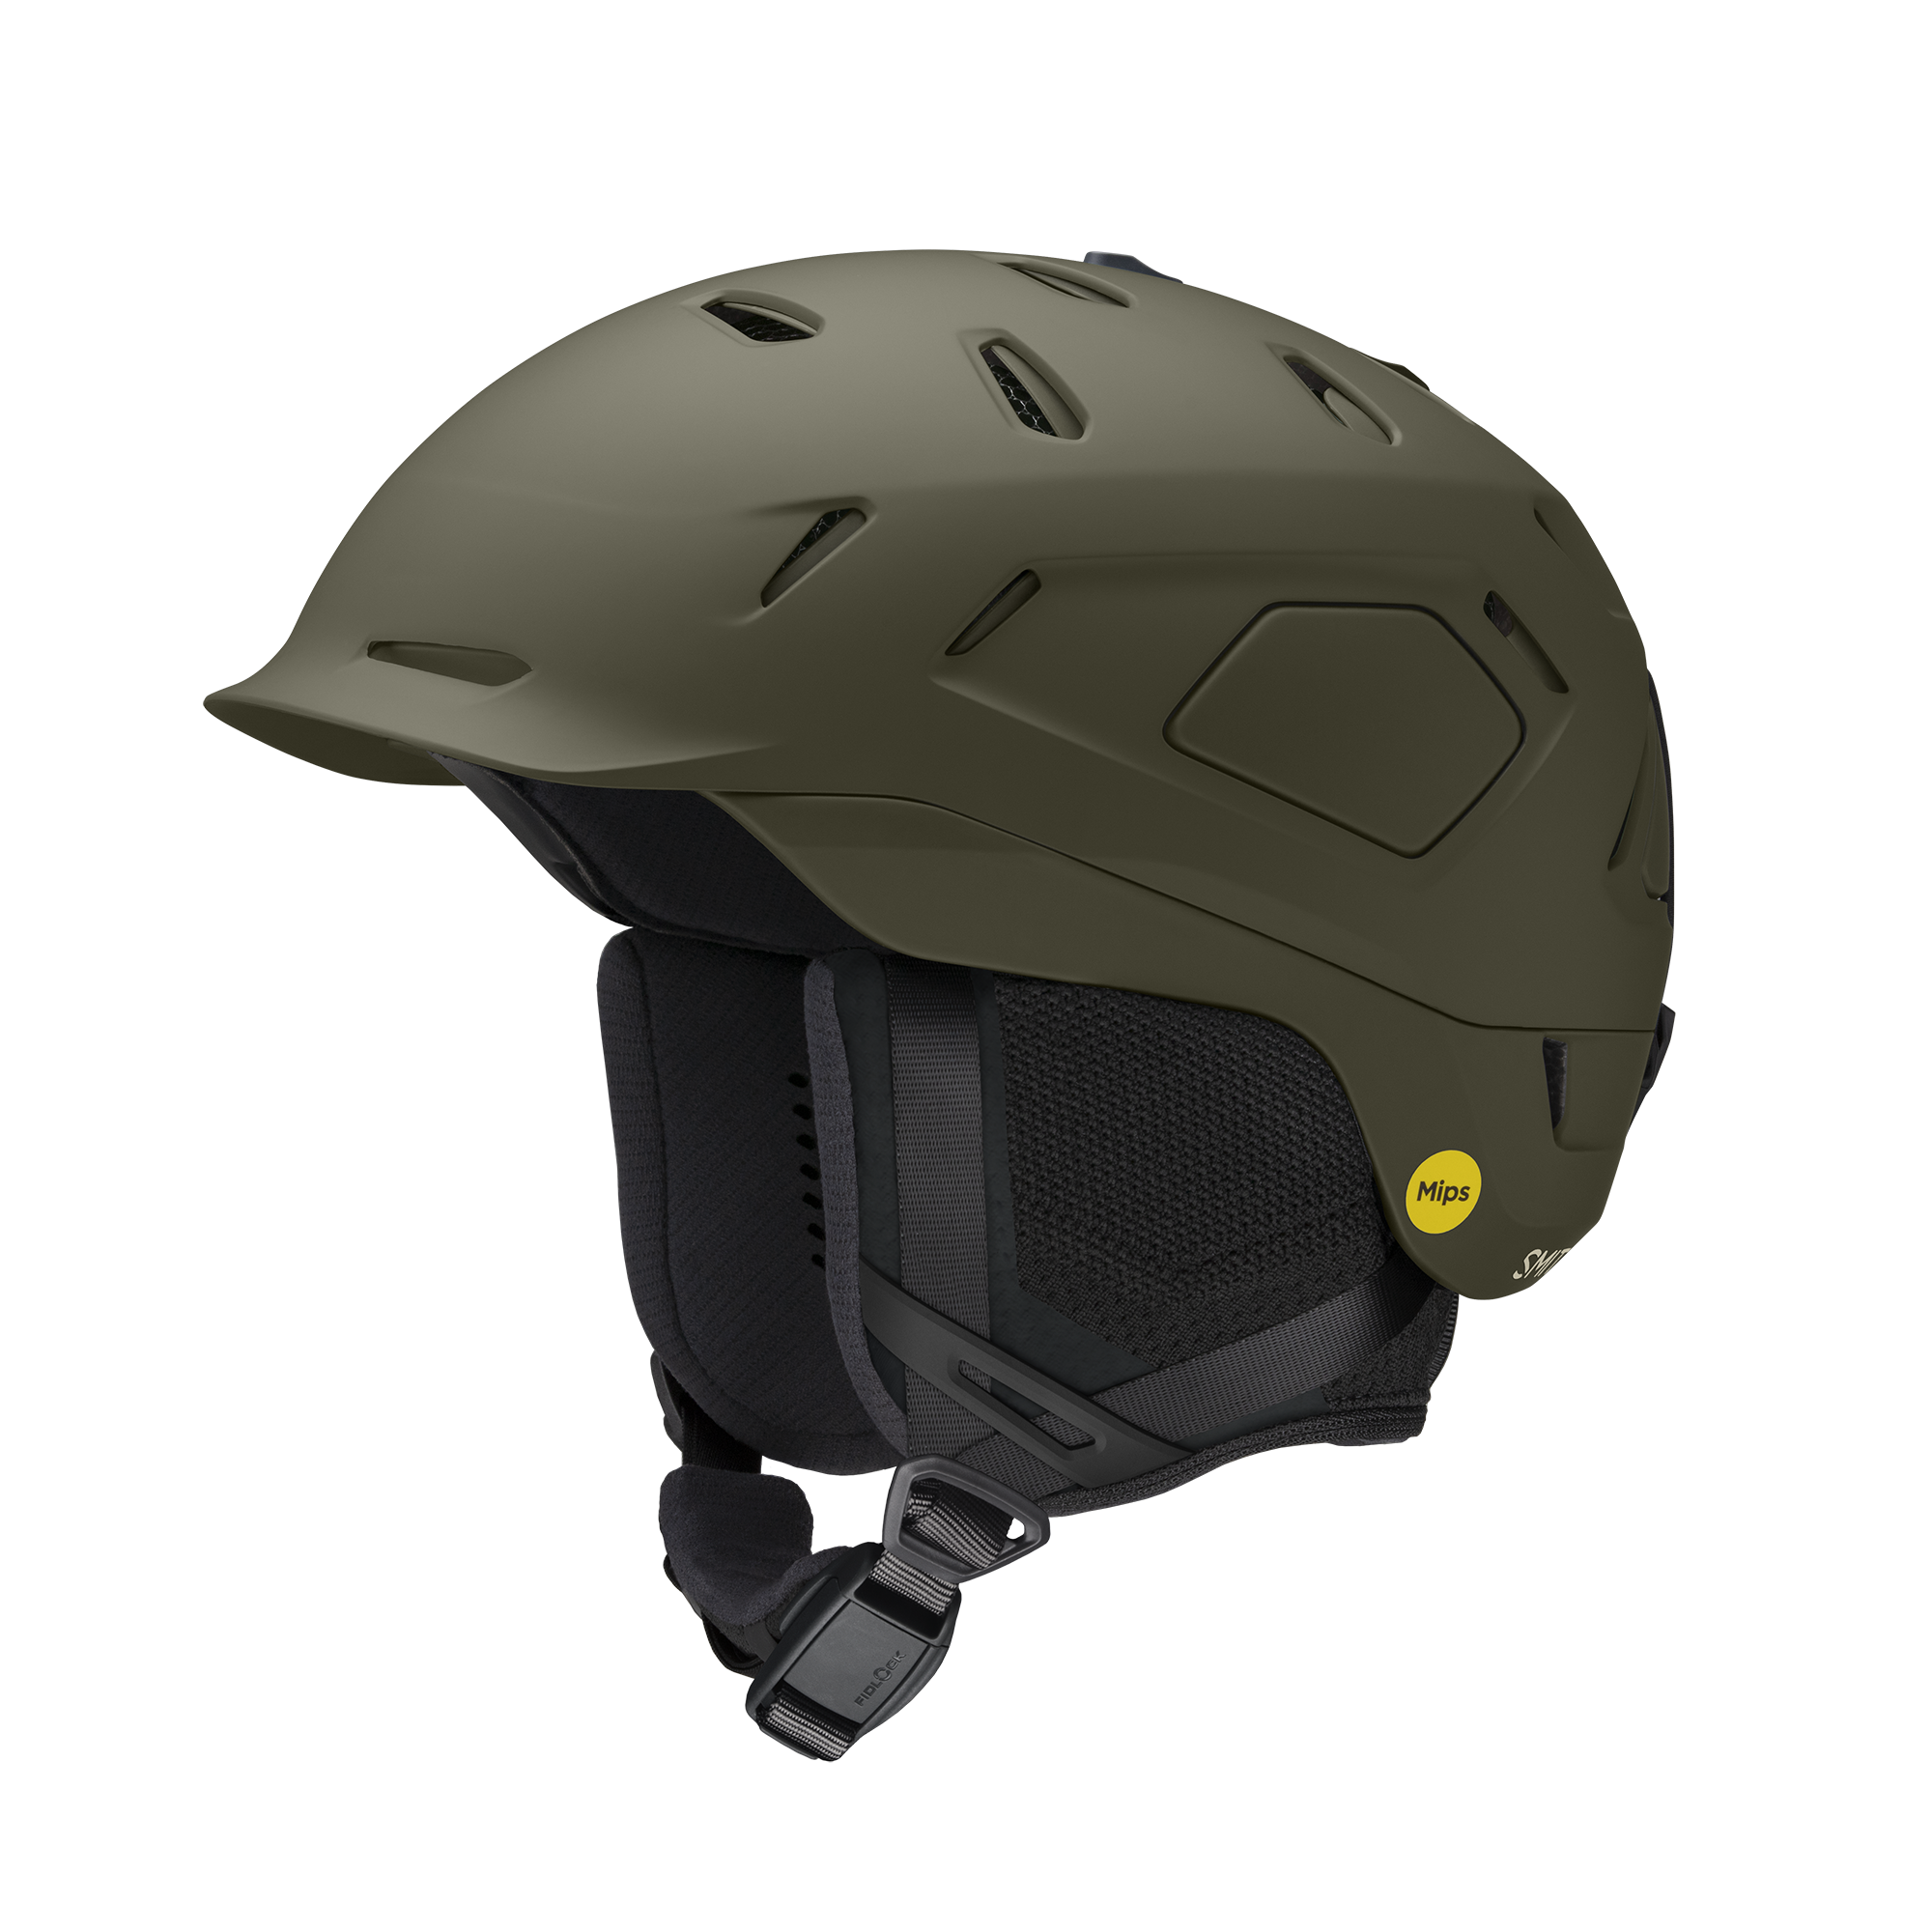 Smith matte forest (green) ski helmet with MIPS logo, soft black ear pieces and air vents.